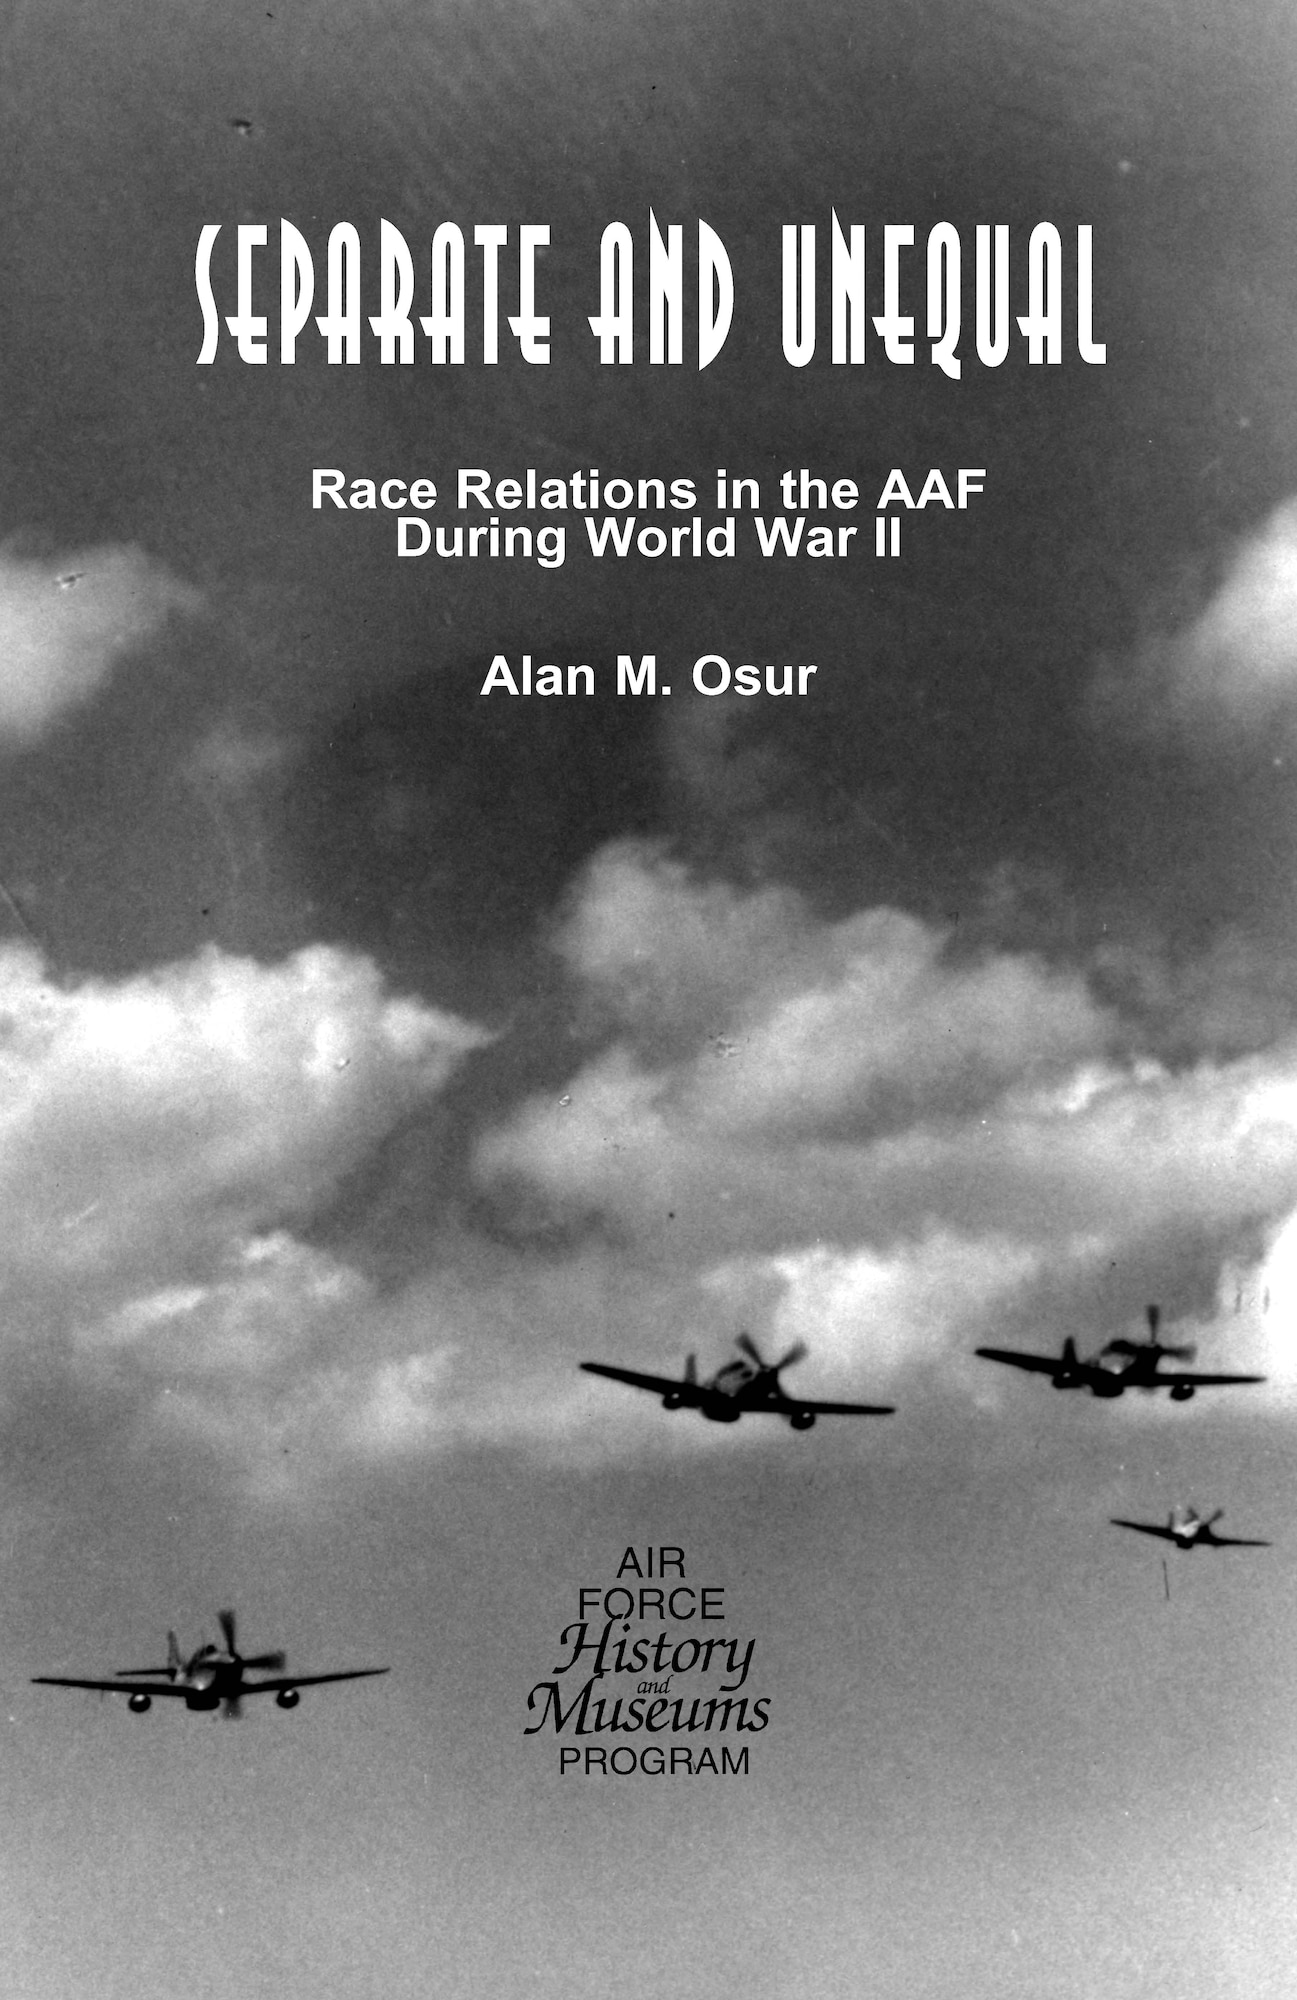 Race relations between white and black Americans during WWII ran the gamut from harmonious to hostile depending on the unique circumstances existing within each unit, command and theater.